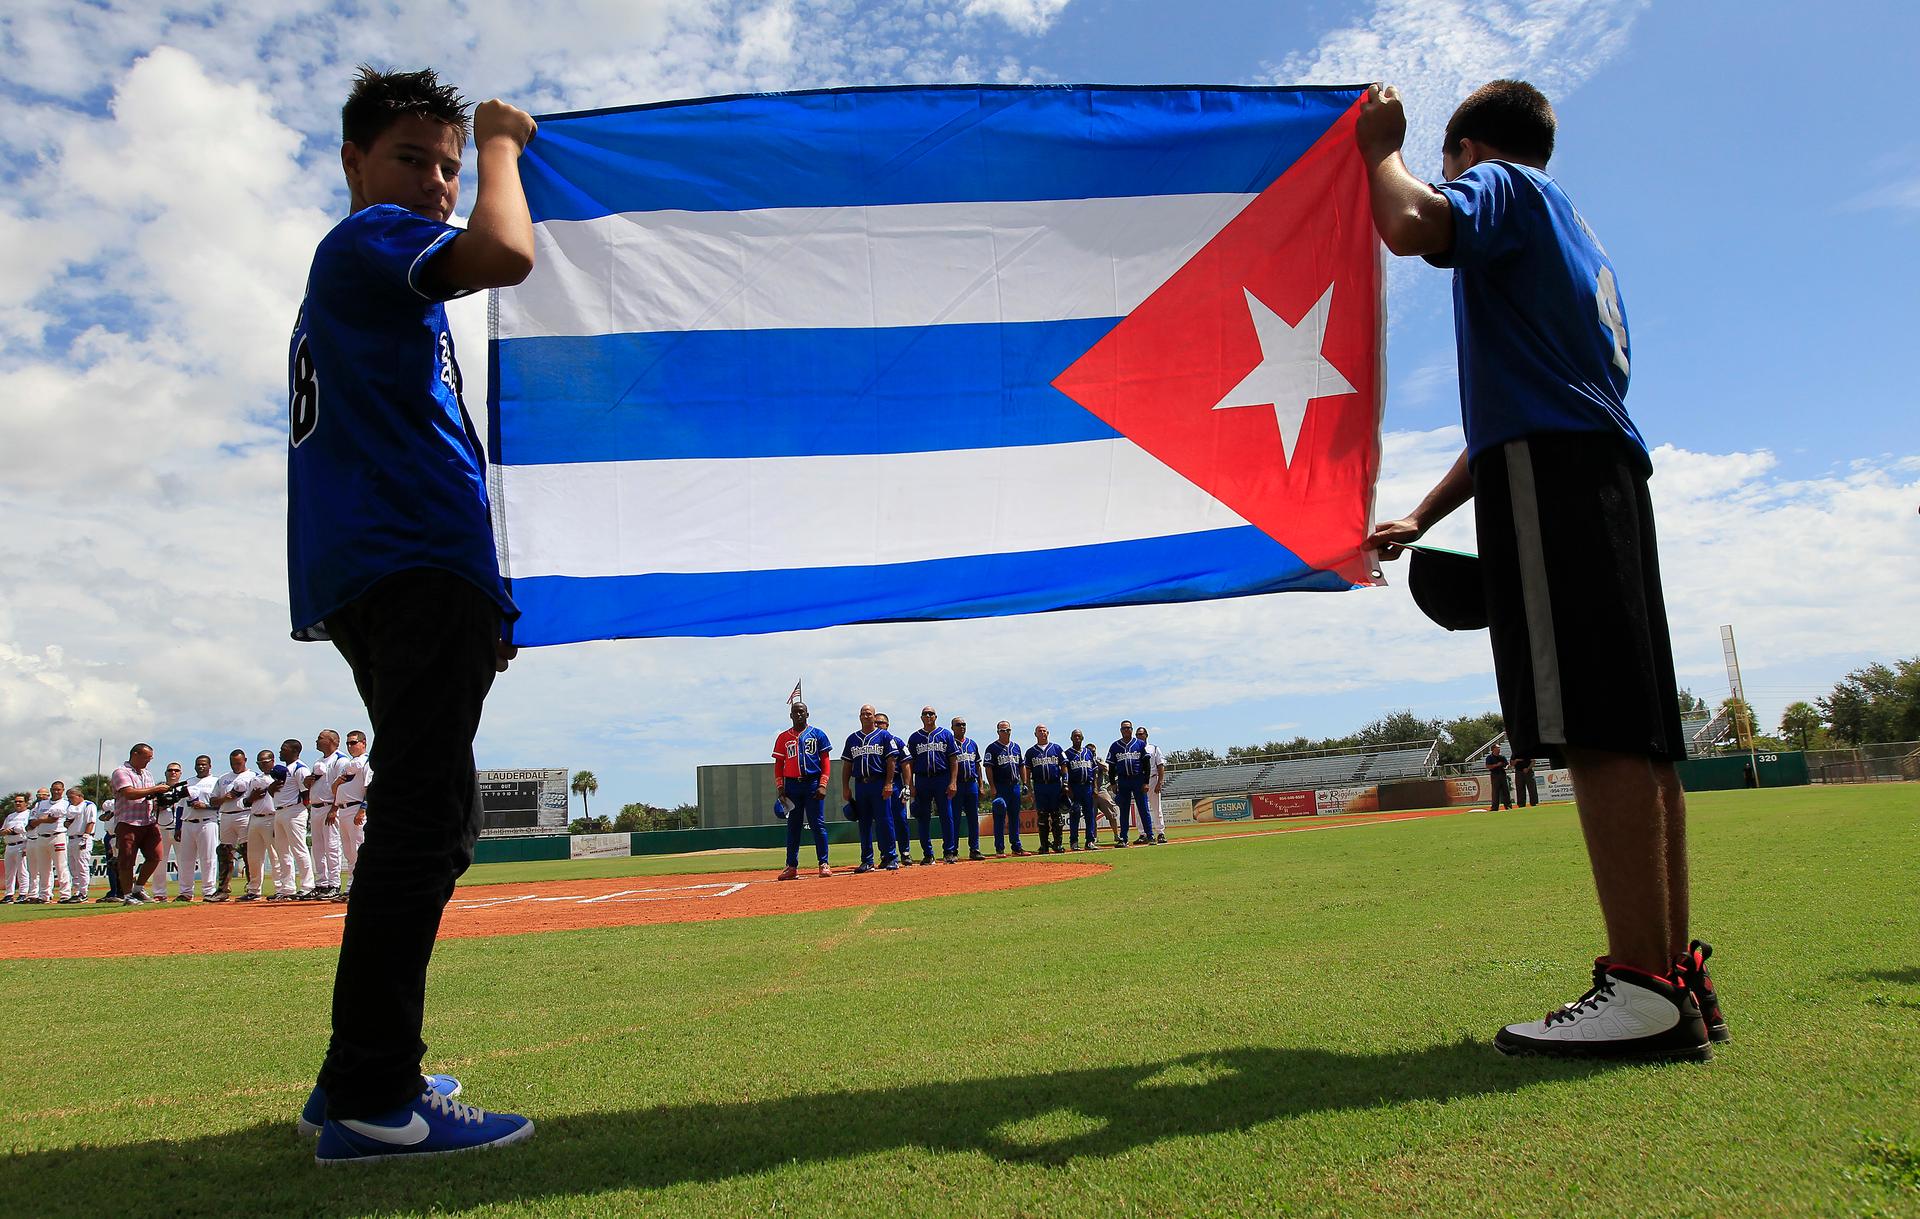 The Cuban flag is displayed during pre-game anthems at exhibition game between members of one of Cuba's most famous baseball teams, Industriale, in Ft. Lauderdale, Florida.